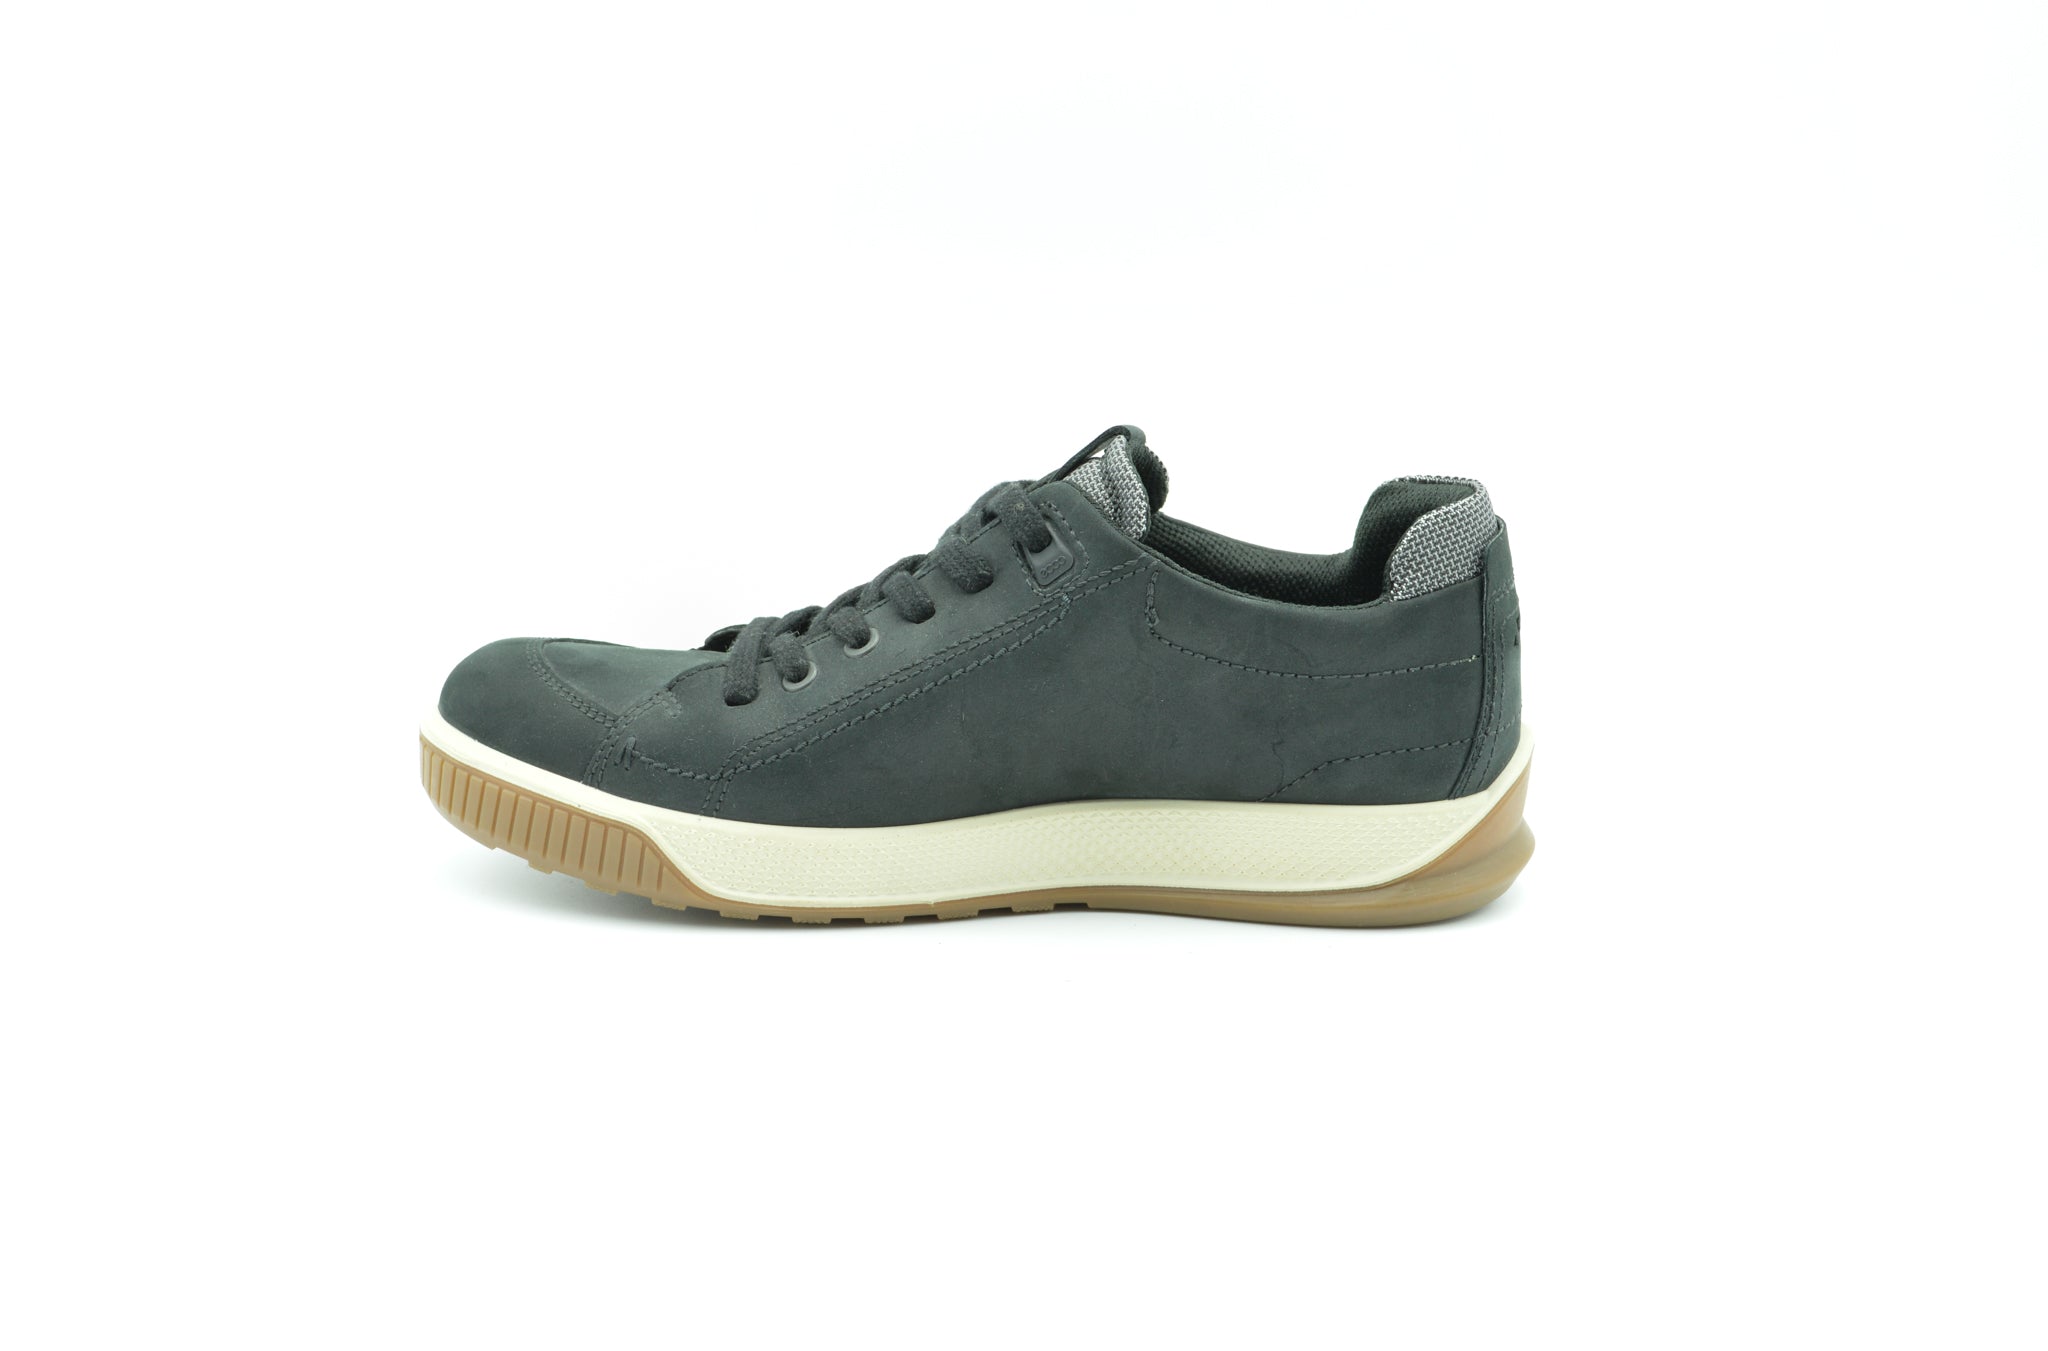 ECCO Byway Tred